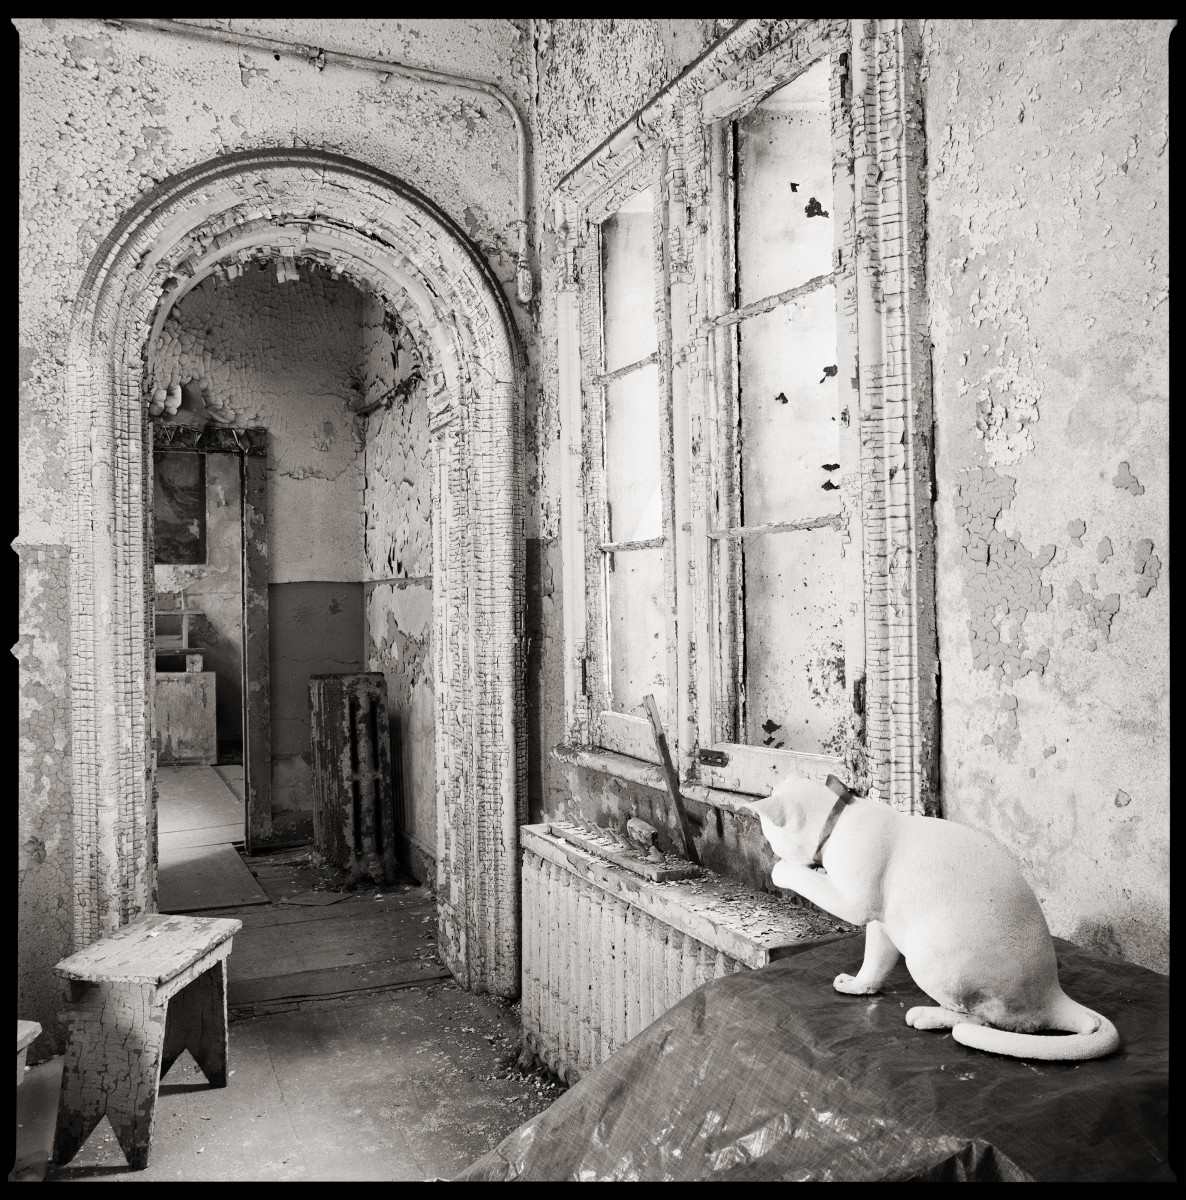 Chaplain's Office by Eric T. Kunsman  Image: ID: A black and white image shows two rooms partitioned by a curved entranceway.  In the first room, there are two windows against the right wall.  There is a cat statue on a desk in the foreground.  There is a seat to the left of the entrance to the second room.  There is a radiator in the second room against the wall.